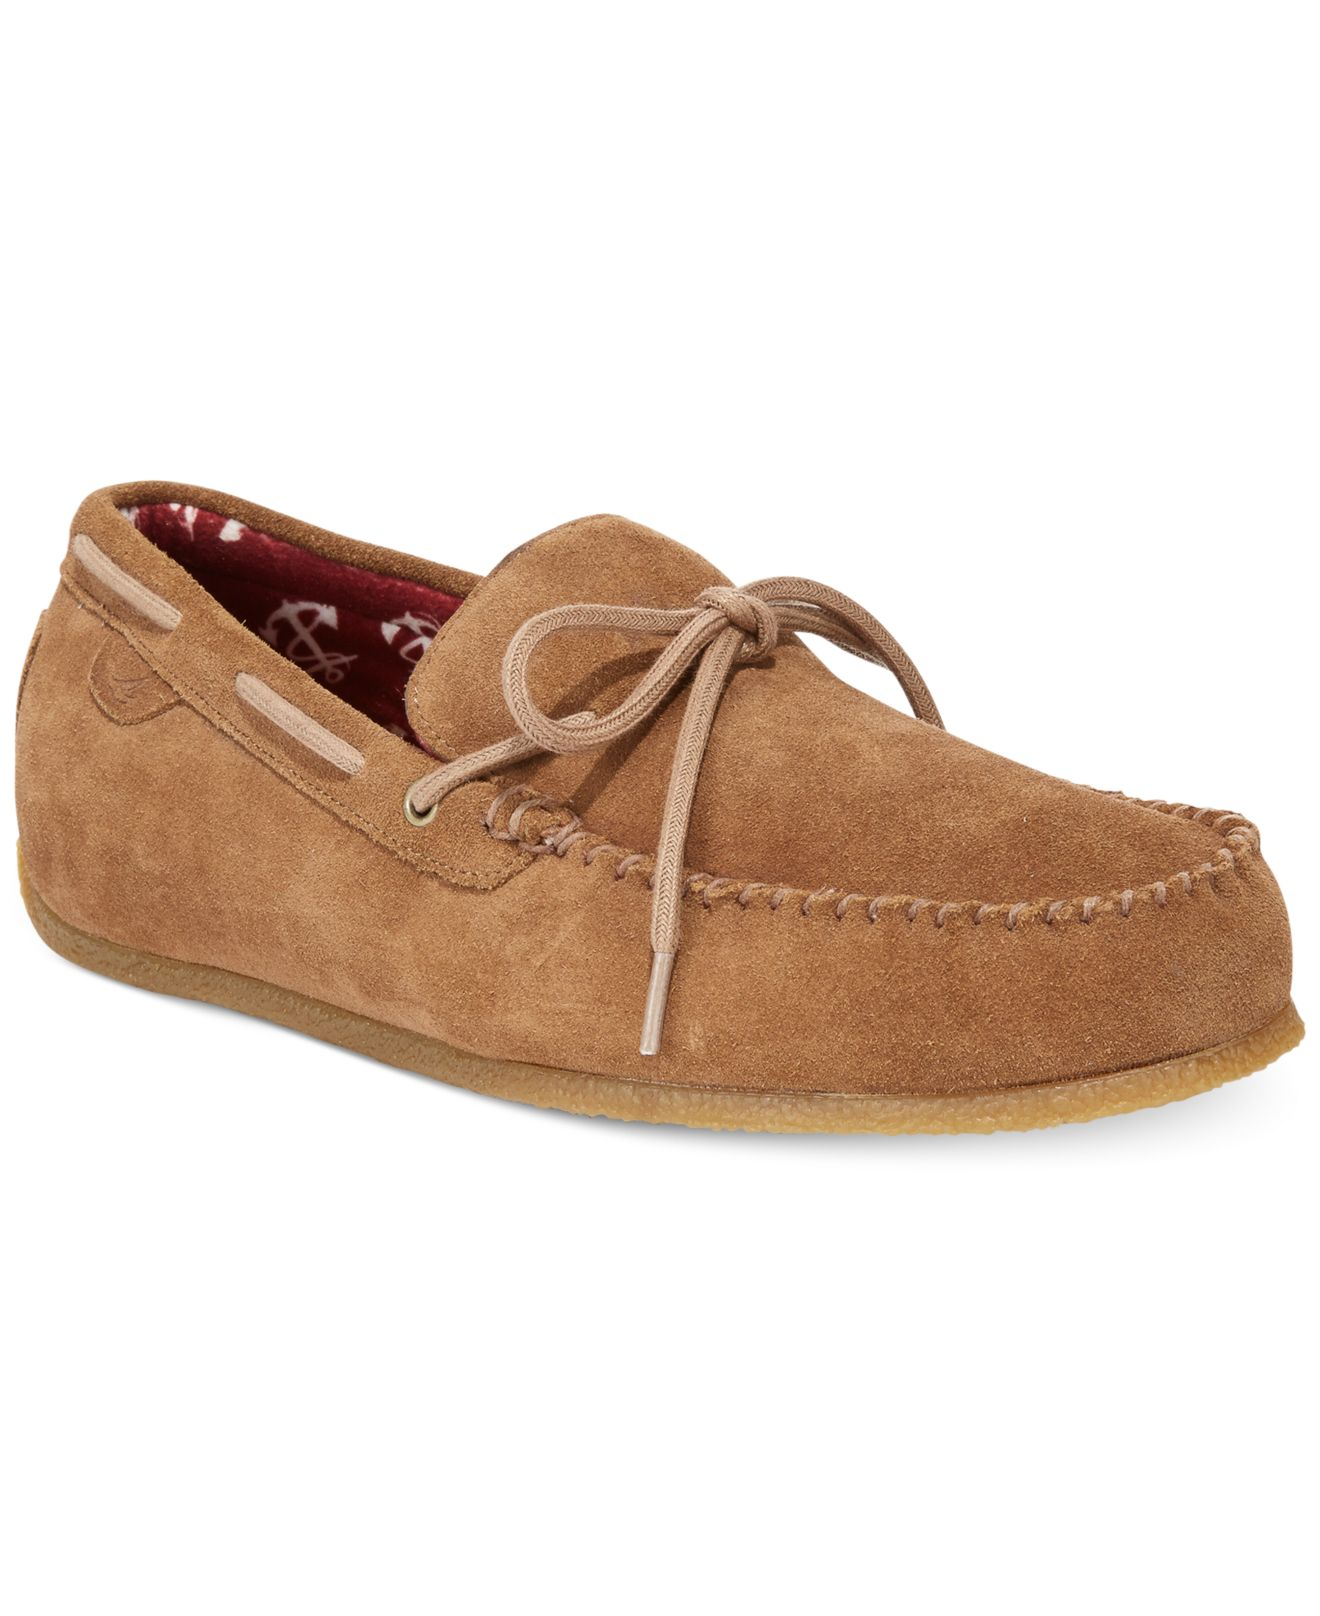 sperry suede loafers coupon for cfbc9 00ff8